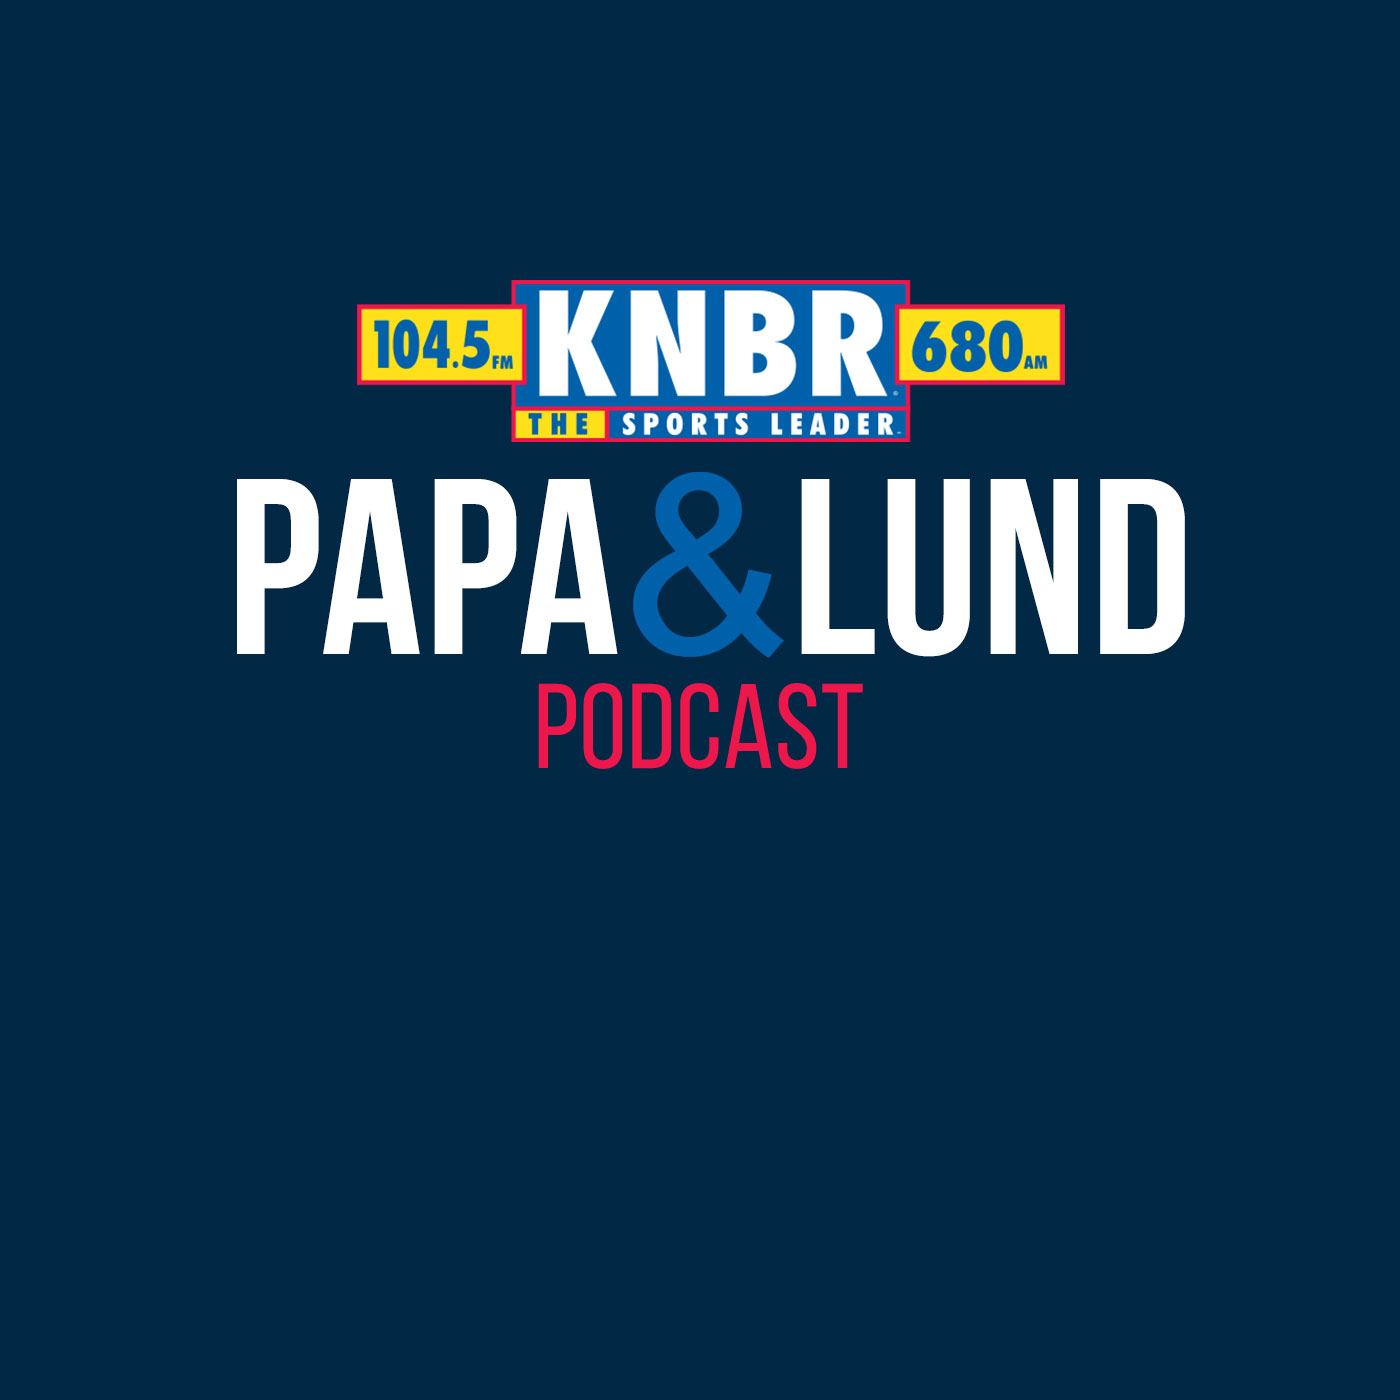 11-22 Sanjay Lal joins Papa and Lund to give us insight on the Seahawks wide receiver room and what has caused their inconsistencies in the passing game